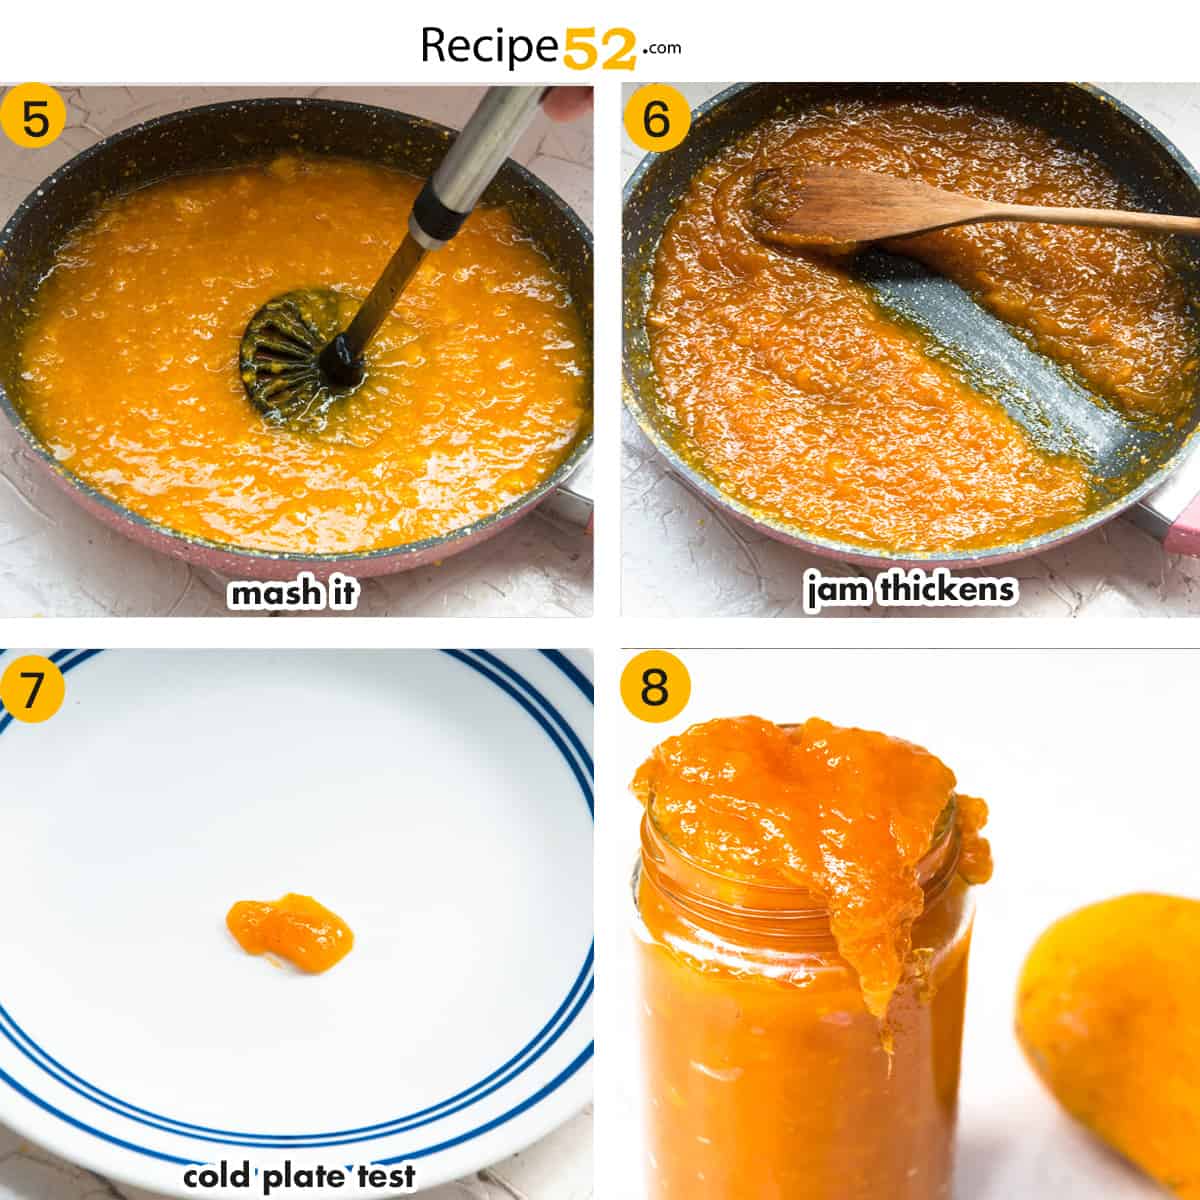 steps to cook and ladle jam.